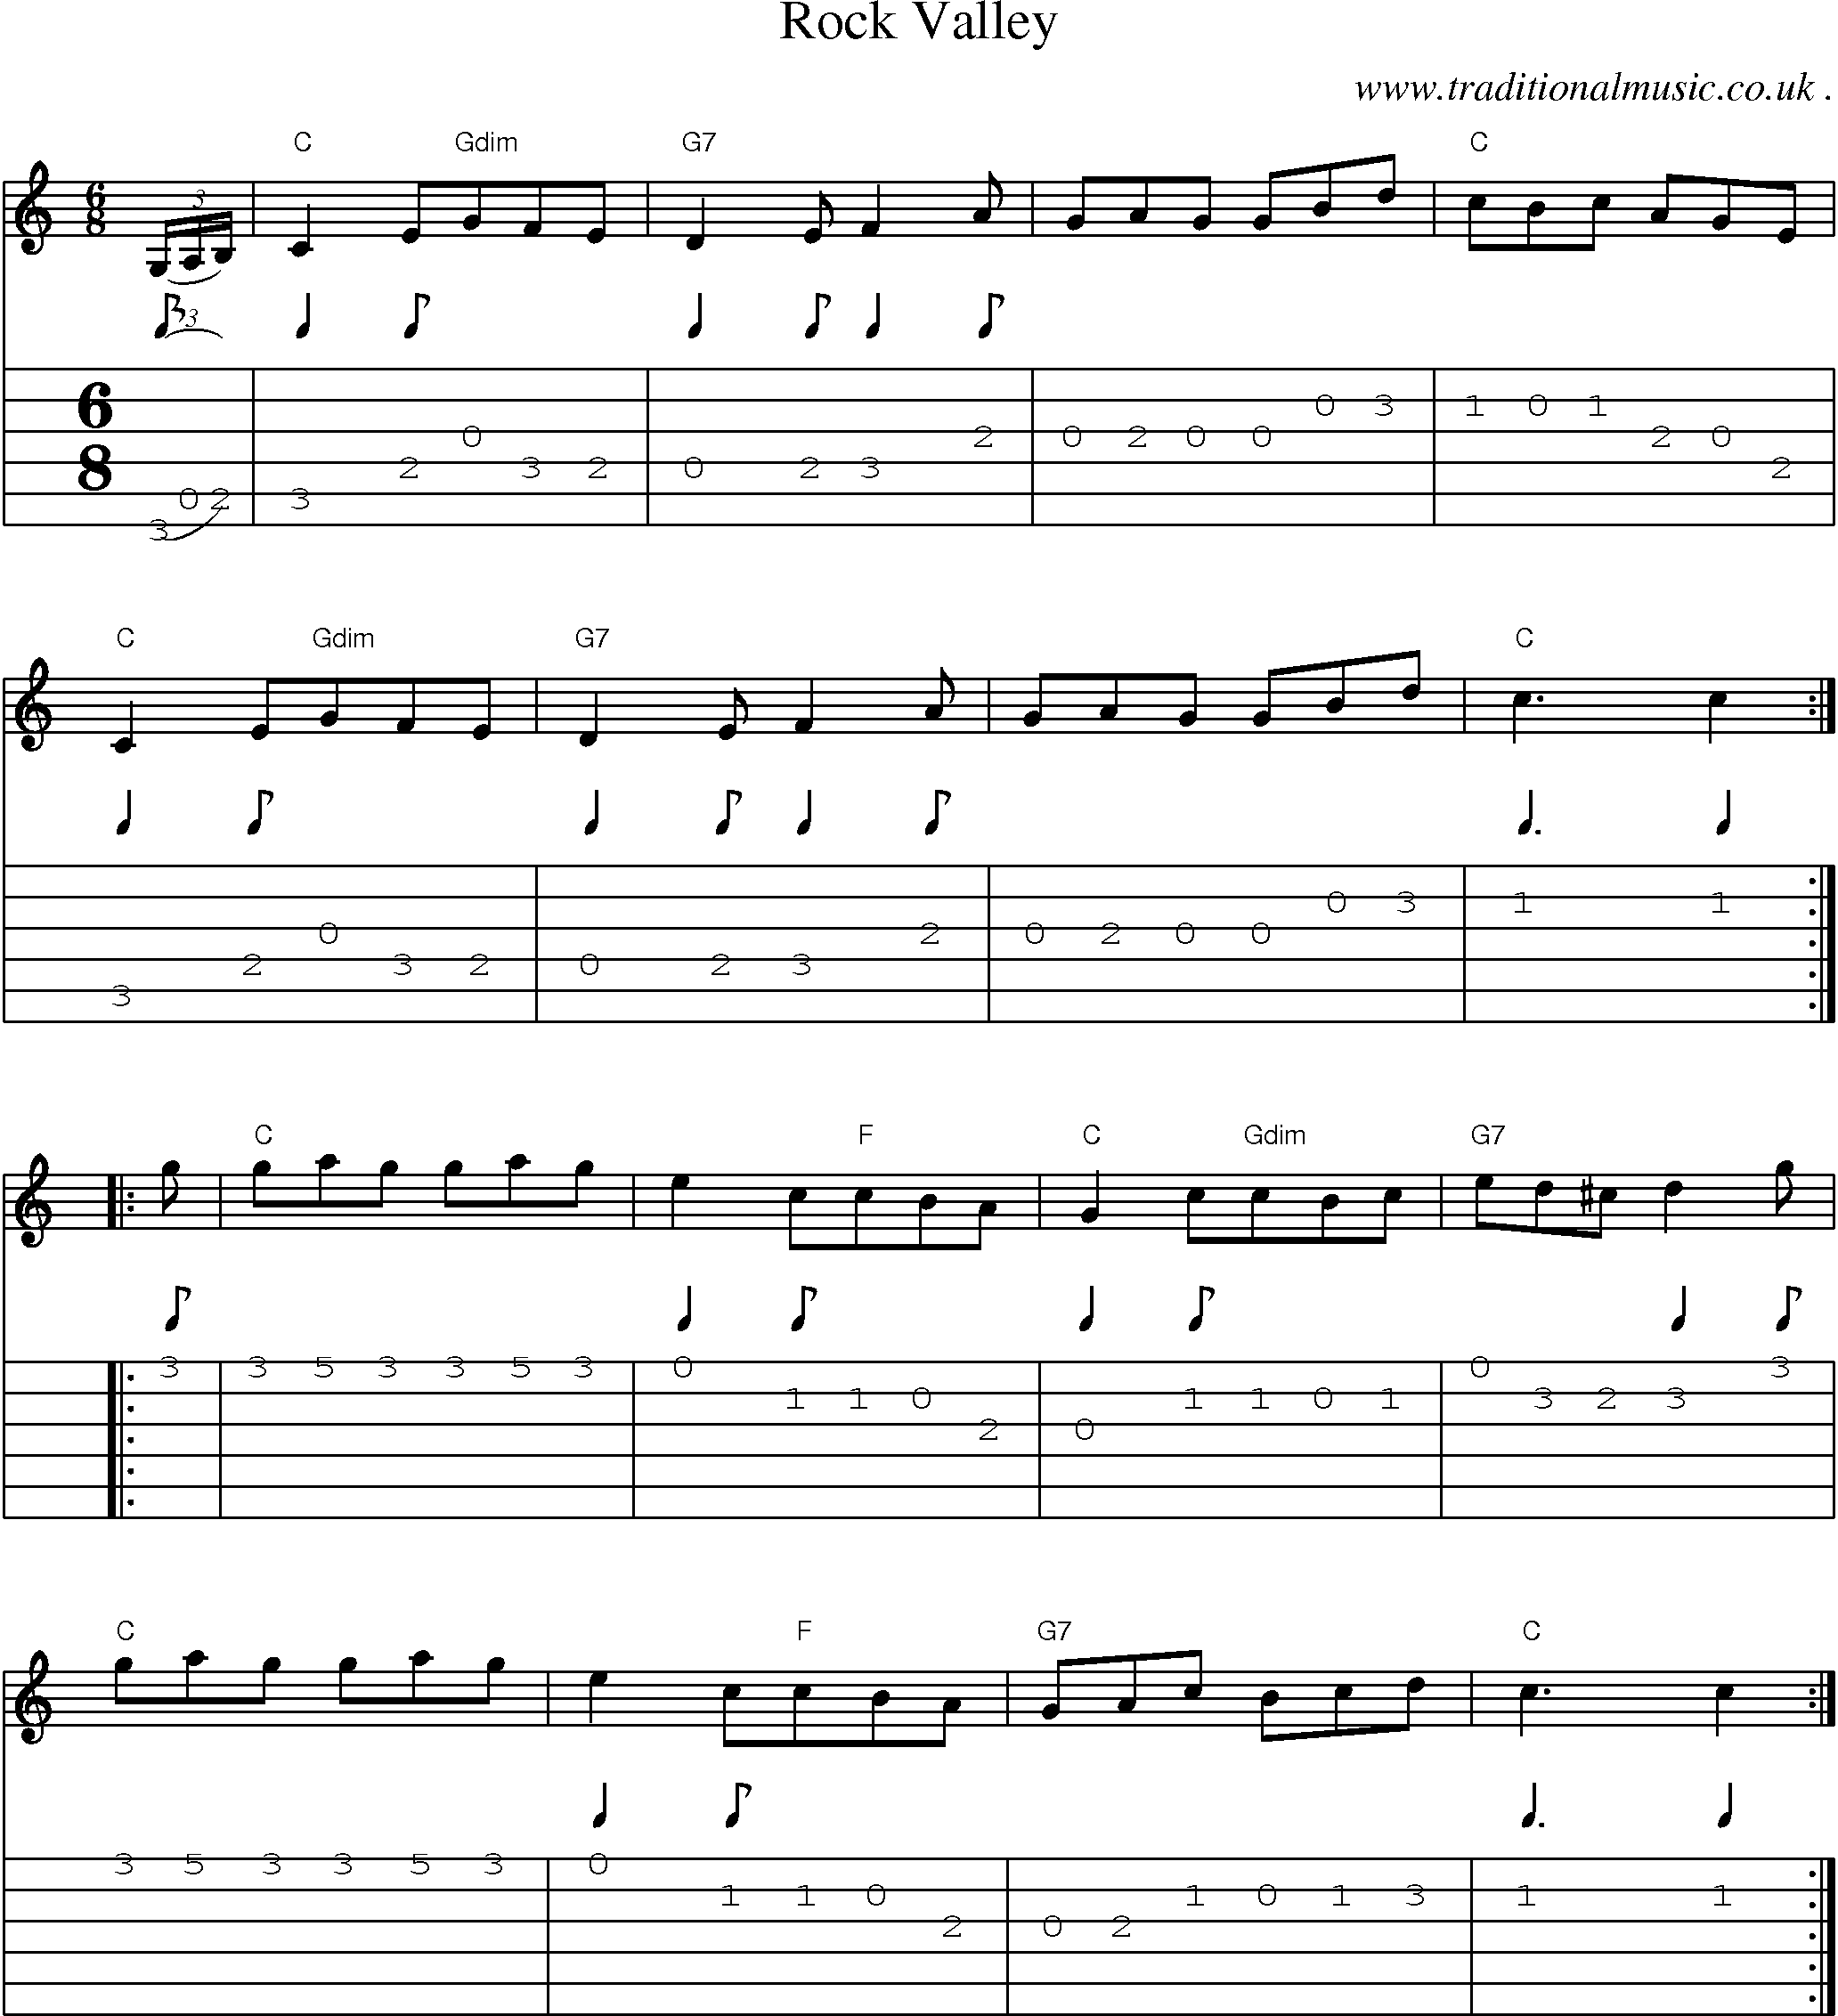 Sheet-Music and Guitar Tabs for Rock Valley